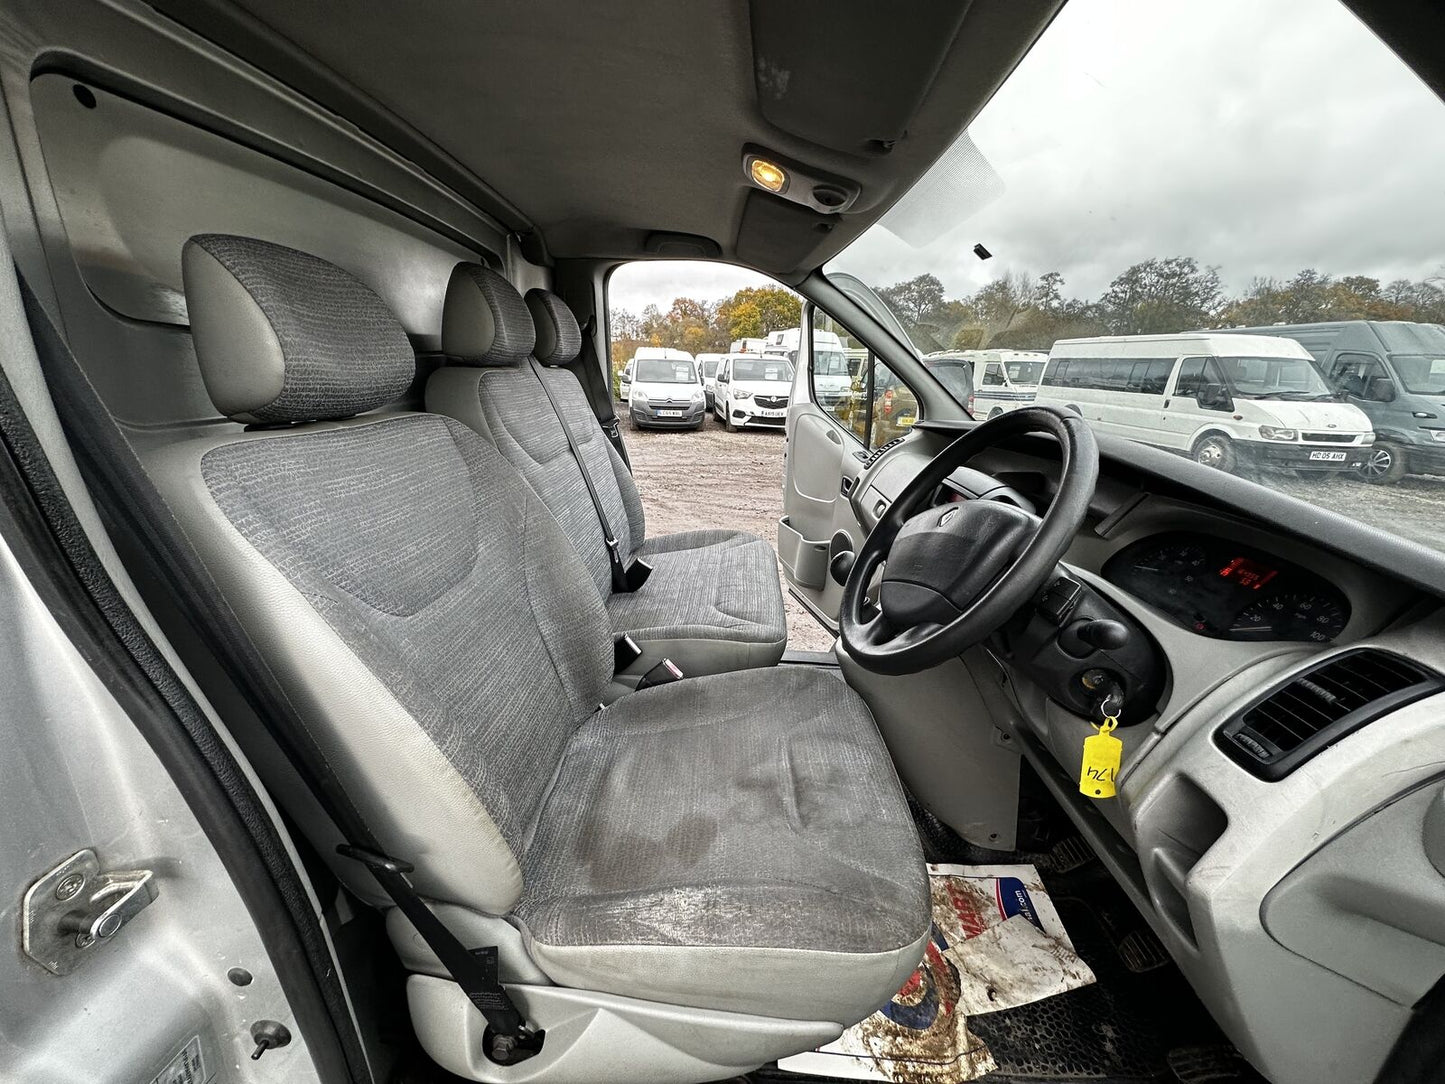 Bid on 2007 RENAULT TRAFIC VIVARO: RELIABLE WORKHORSE - MOT: 15TH NOVEMBER 2024 - NO VAT ON HAMMER- Buy &amp; Sell on Auction with EAMA Group